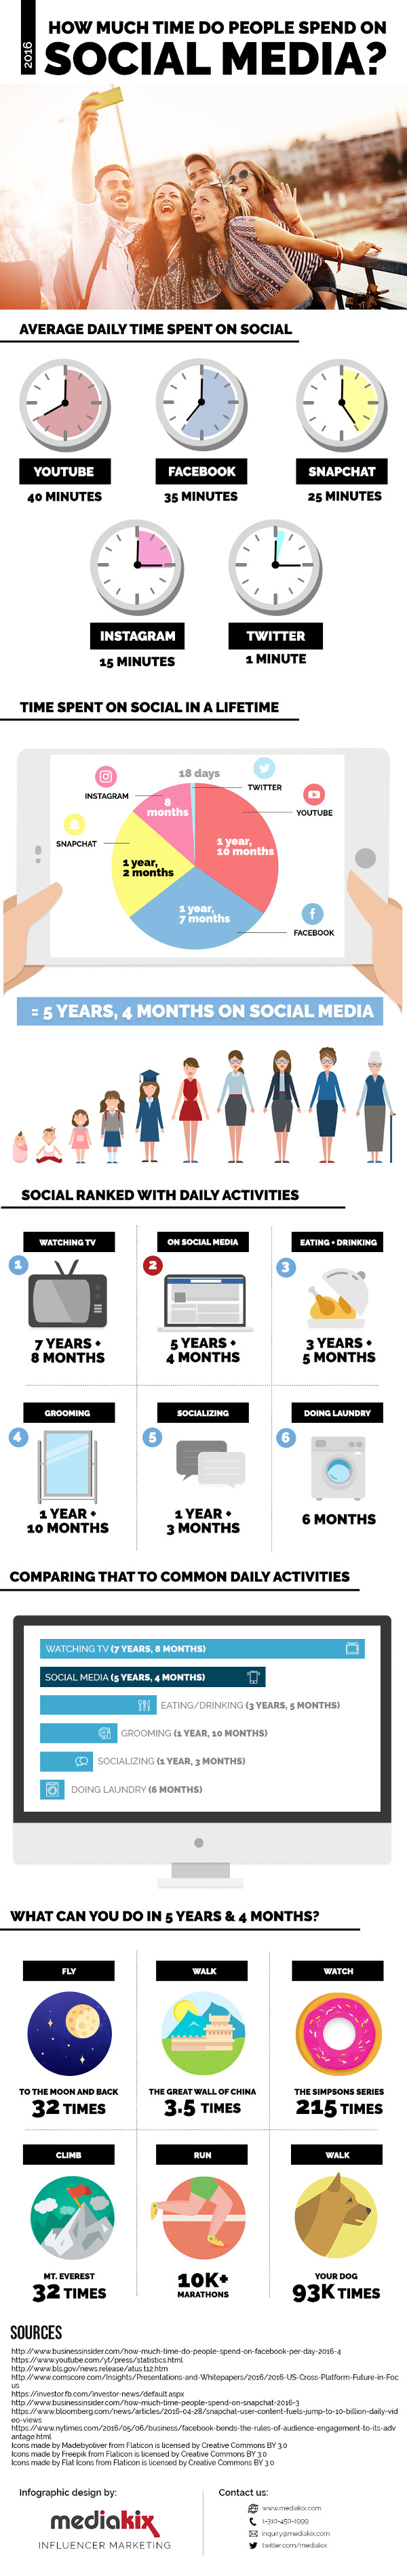 How much time do people spend on social media